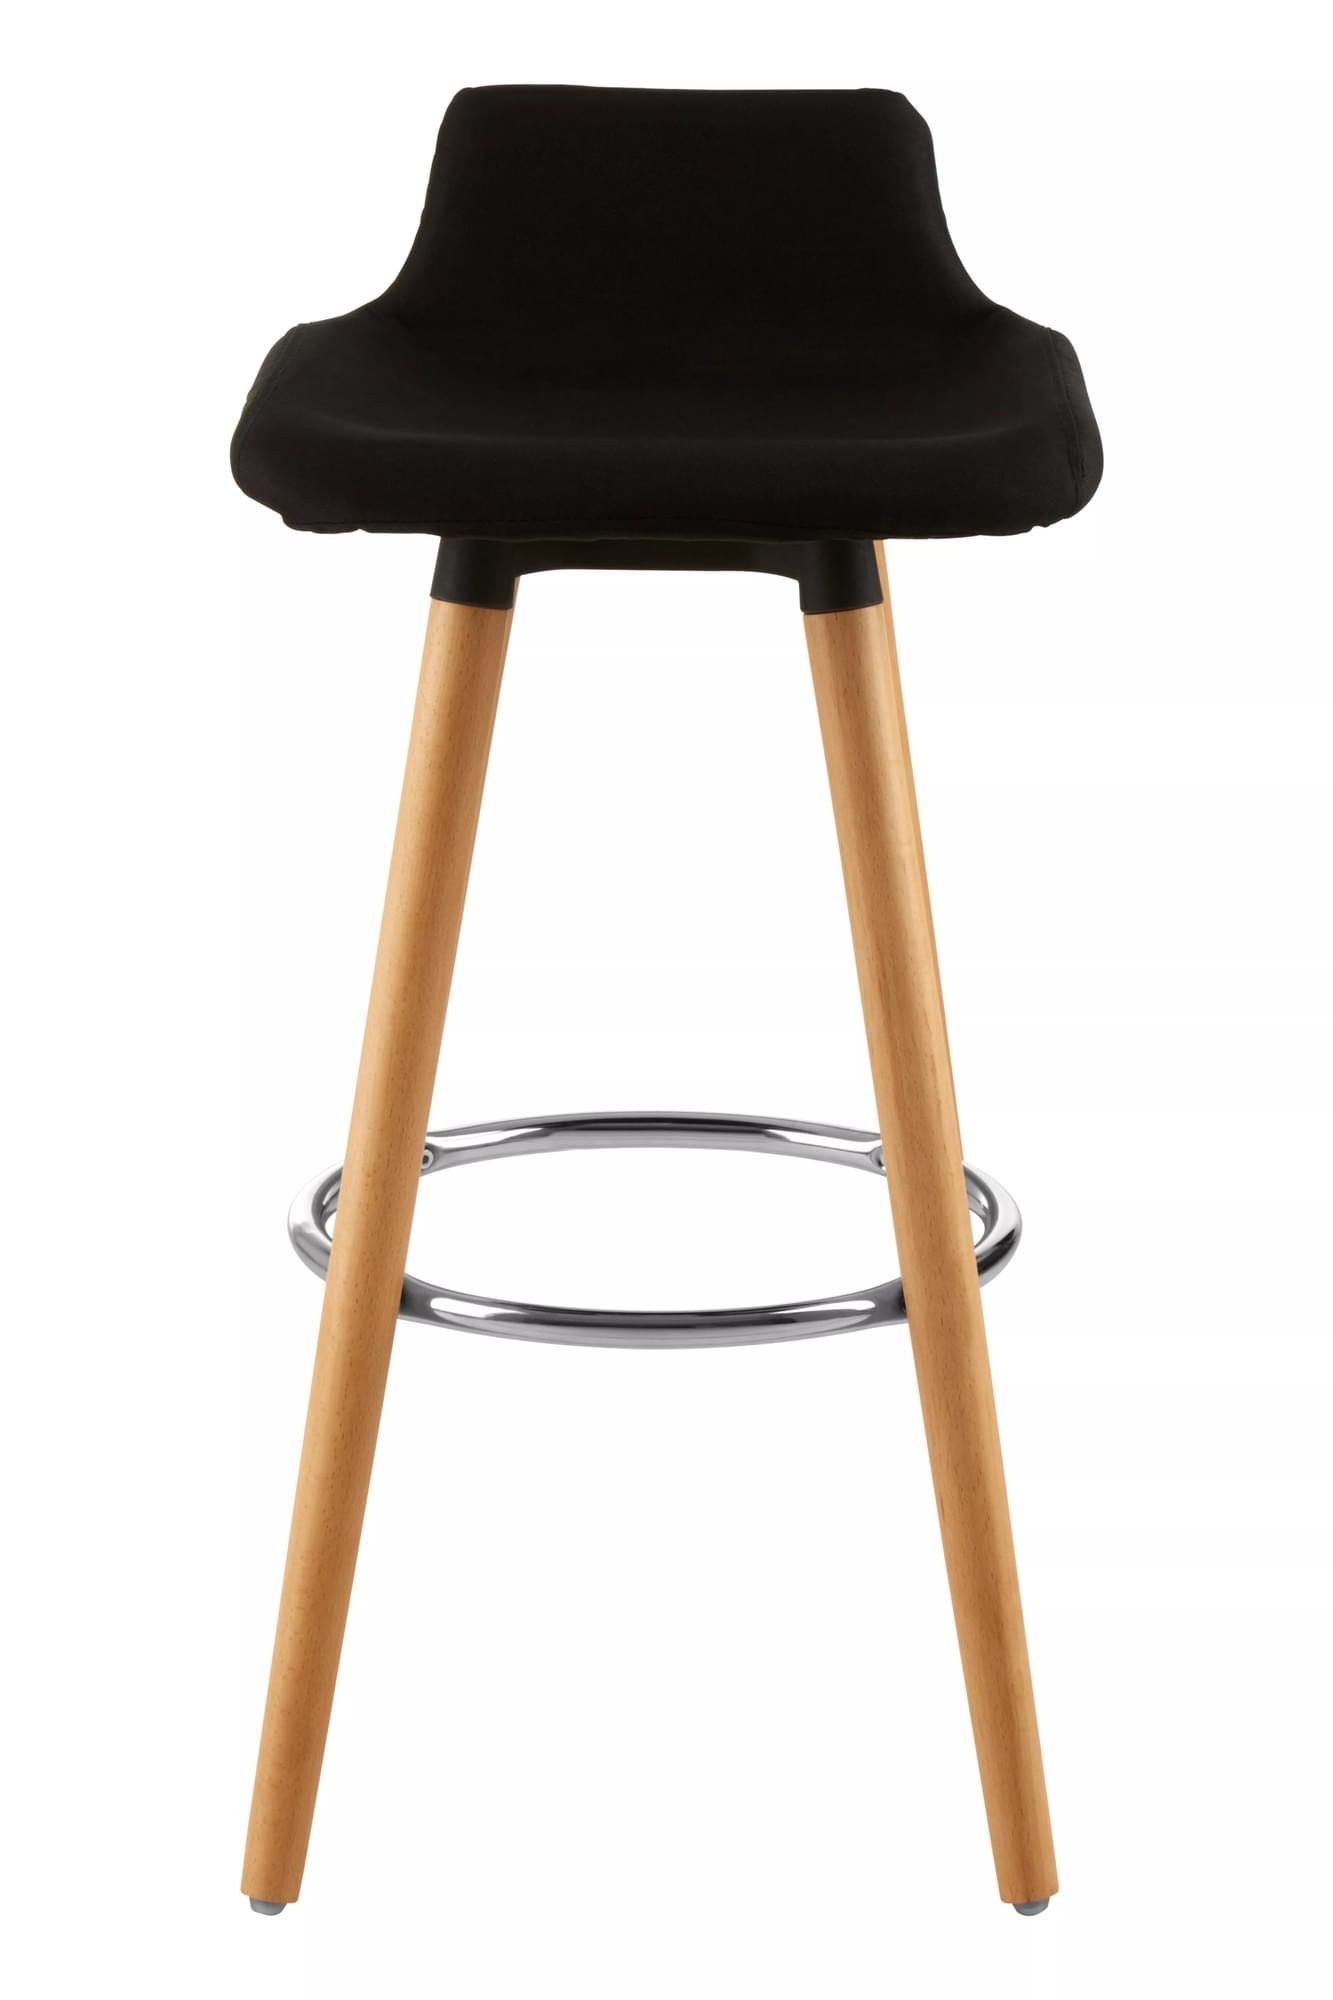 Interiors by Premier Black Bar Stool, Comfortable Seating Breakfast Bar Stool, Space-Saver Kitchen S